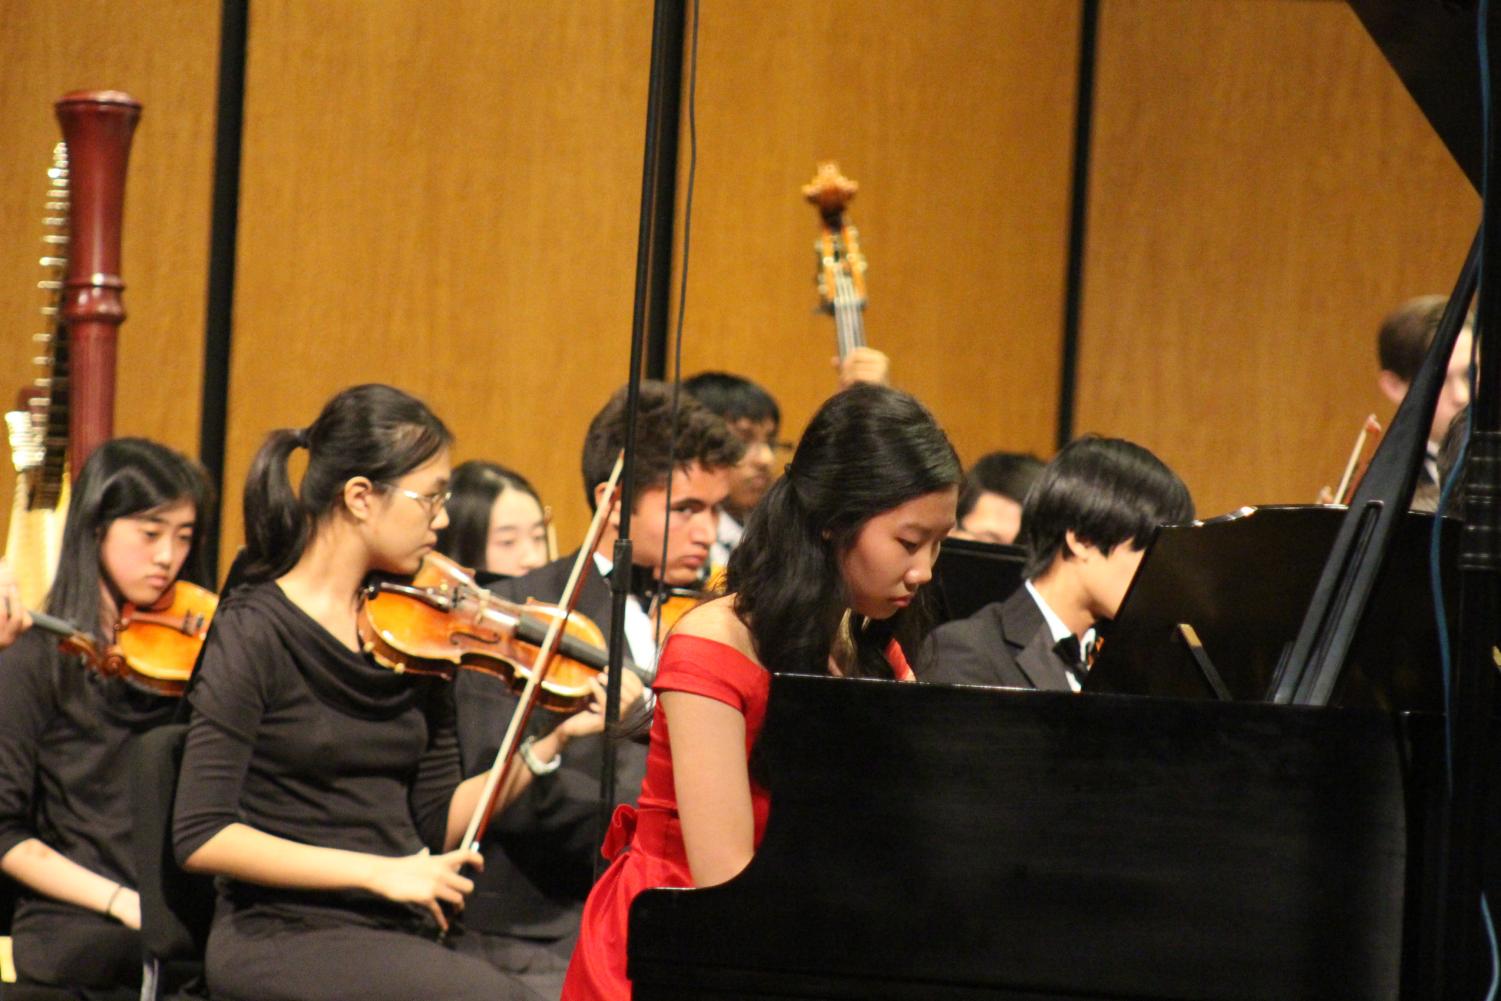 Stephanie Li '19 performs a piano concerto while the rest of Patriot Orchestra plays along. Future soloists will include Adele Lee '19 and Reid Harmon '19.